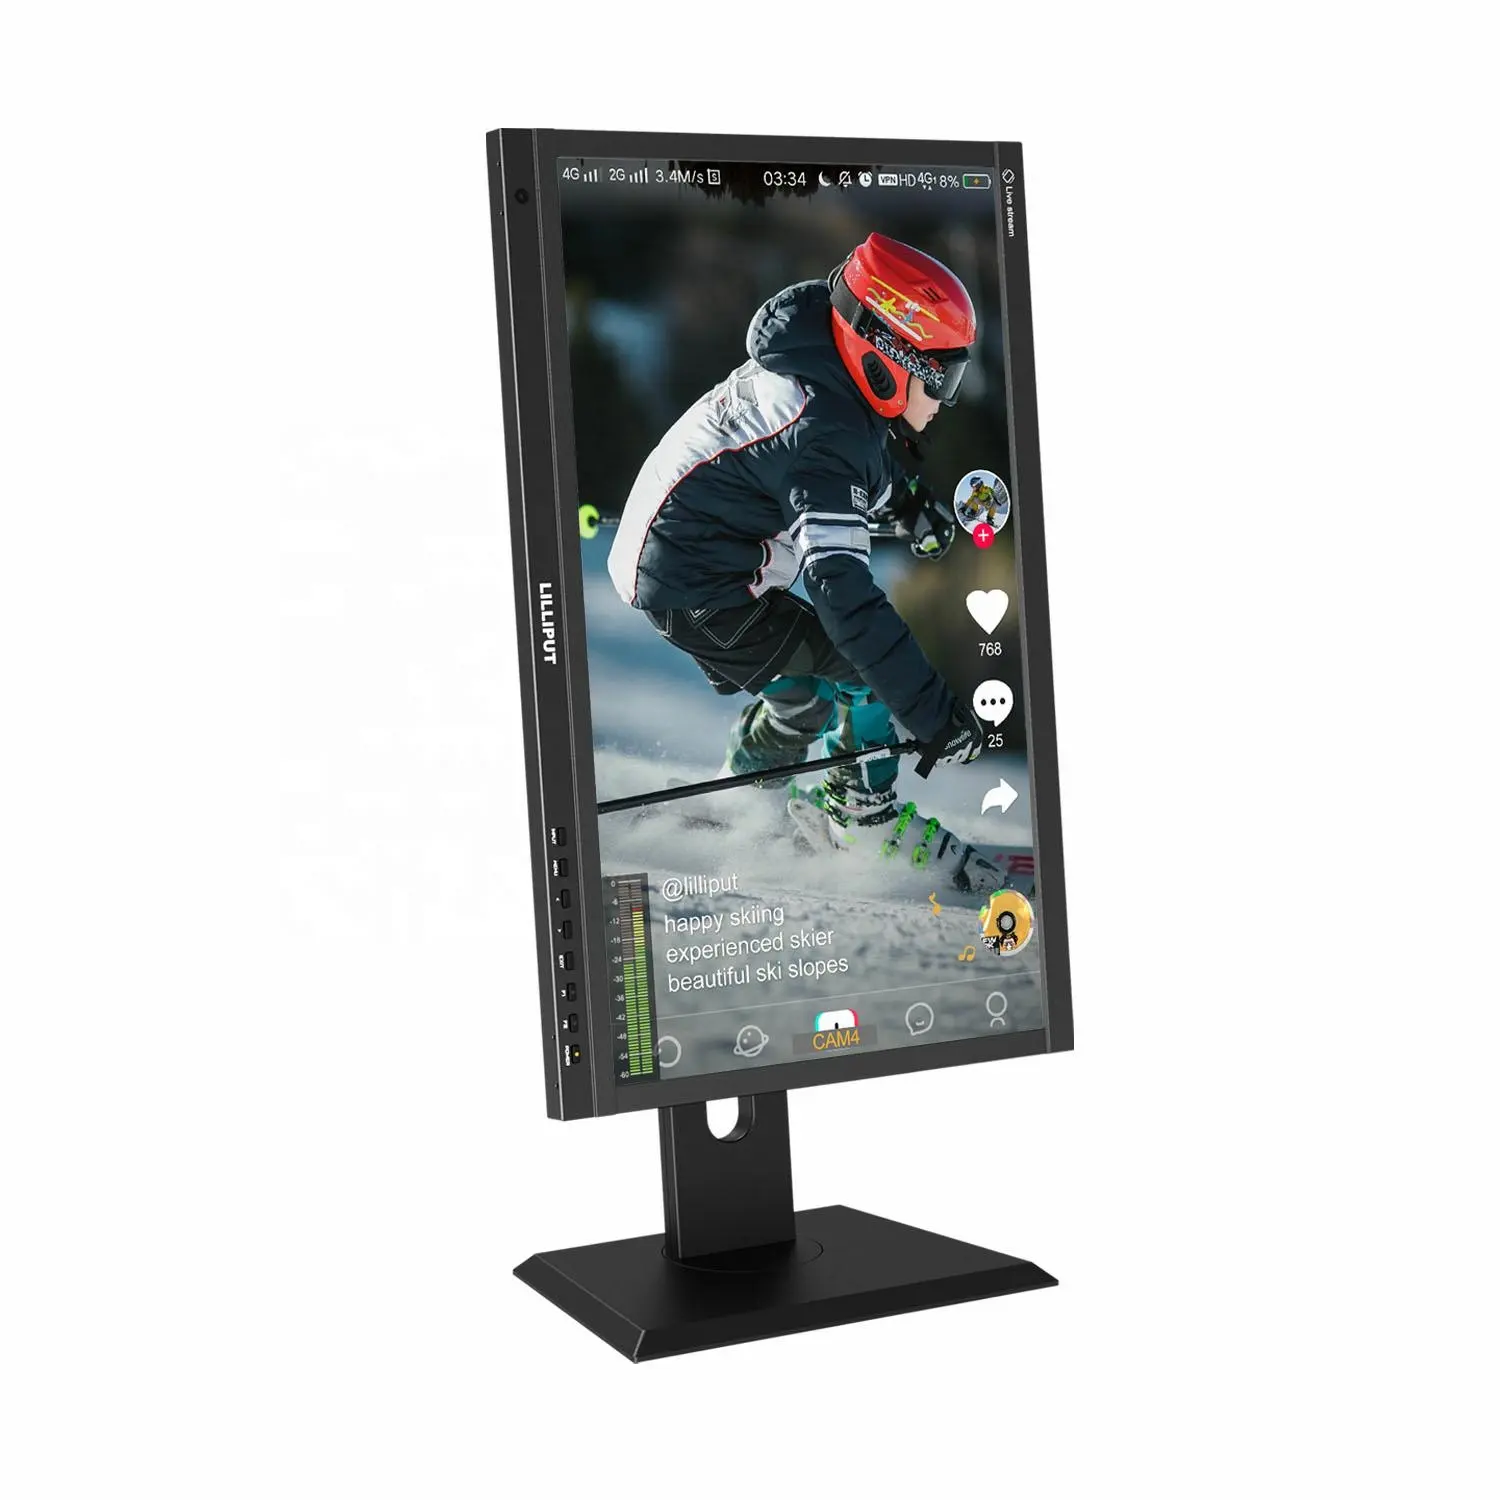 LILLIPUT PVM220S Full HD 21.5 inch Quad Split Multiview Monitor with SDI  HDMI  USB type C  used for PGM live streaming